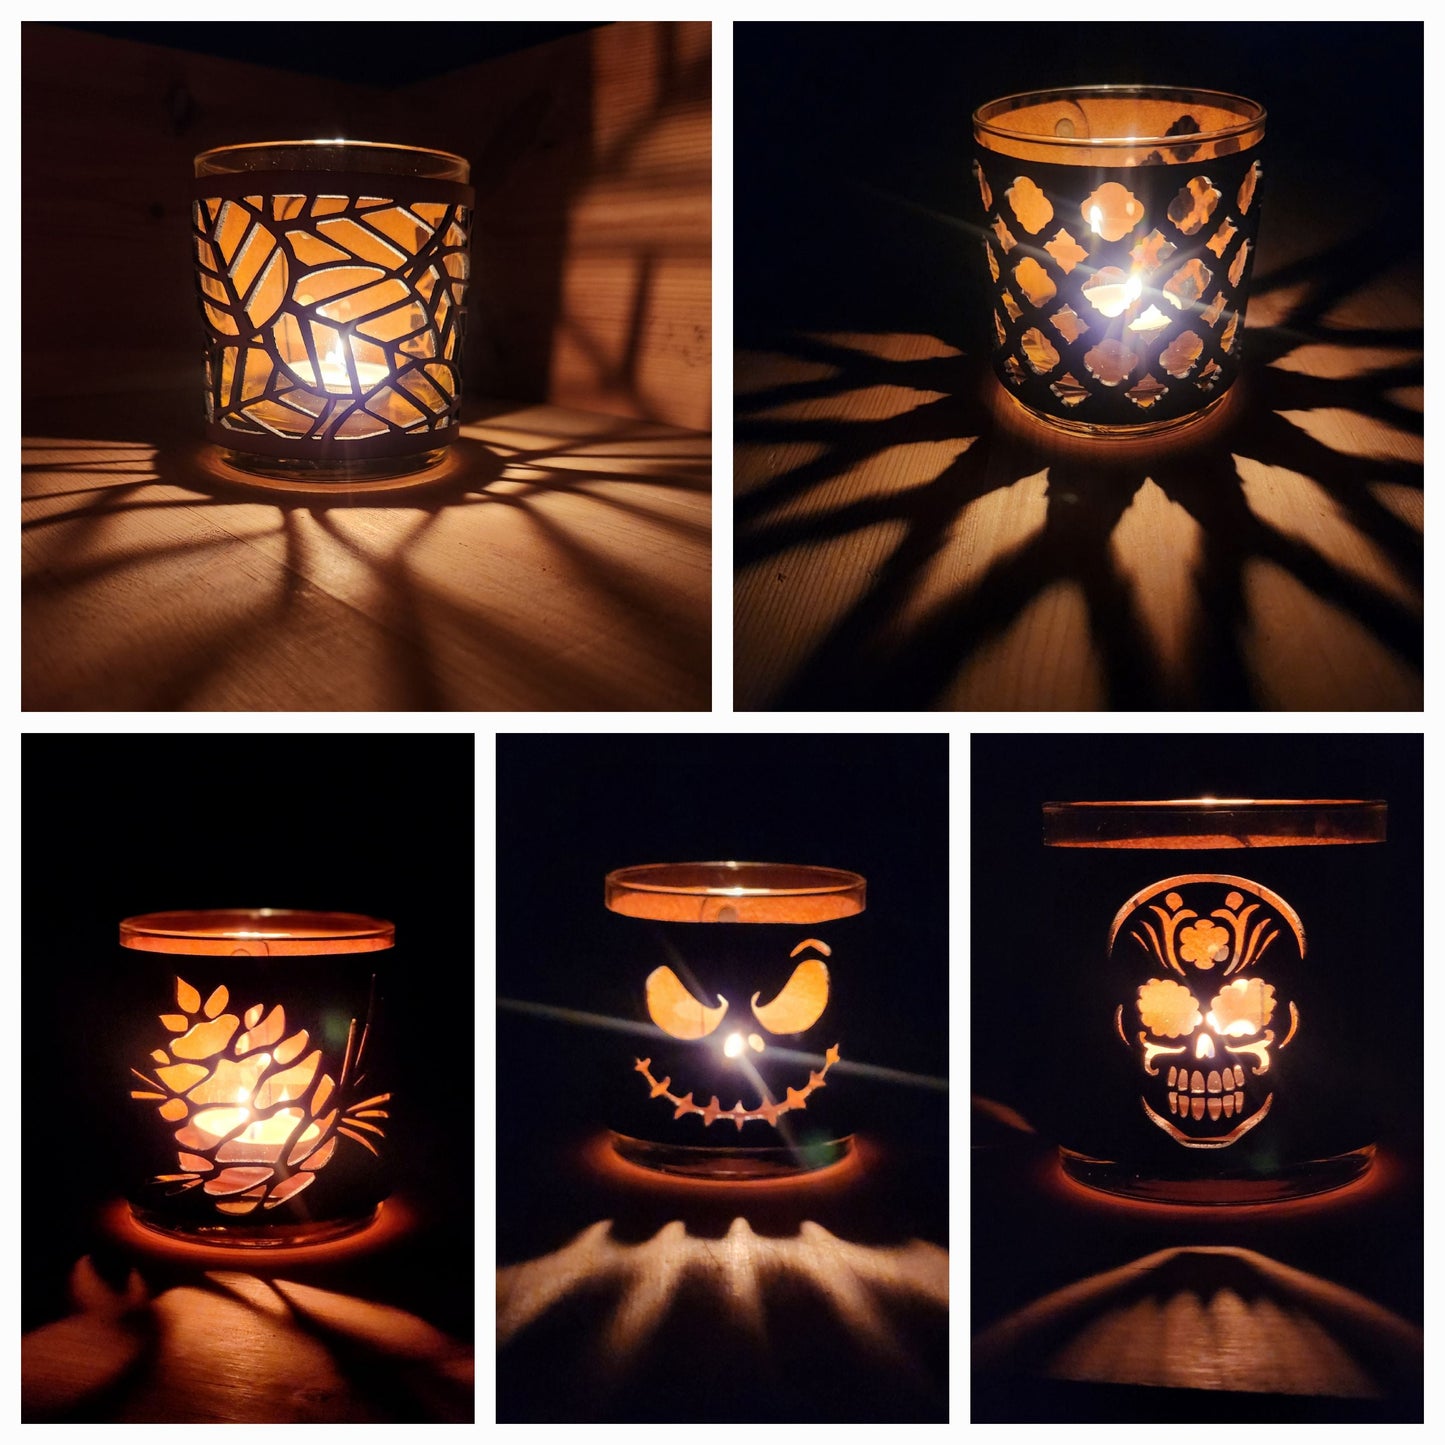 Lotus Flower Leather and Glass candle holder